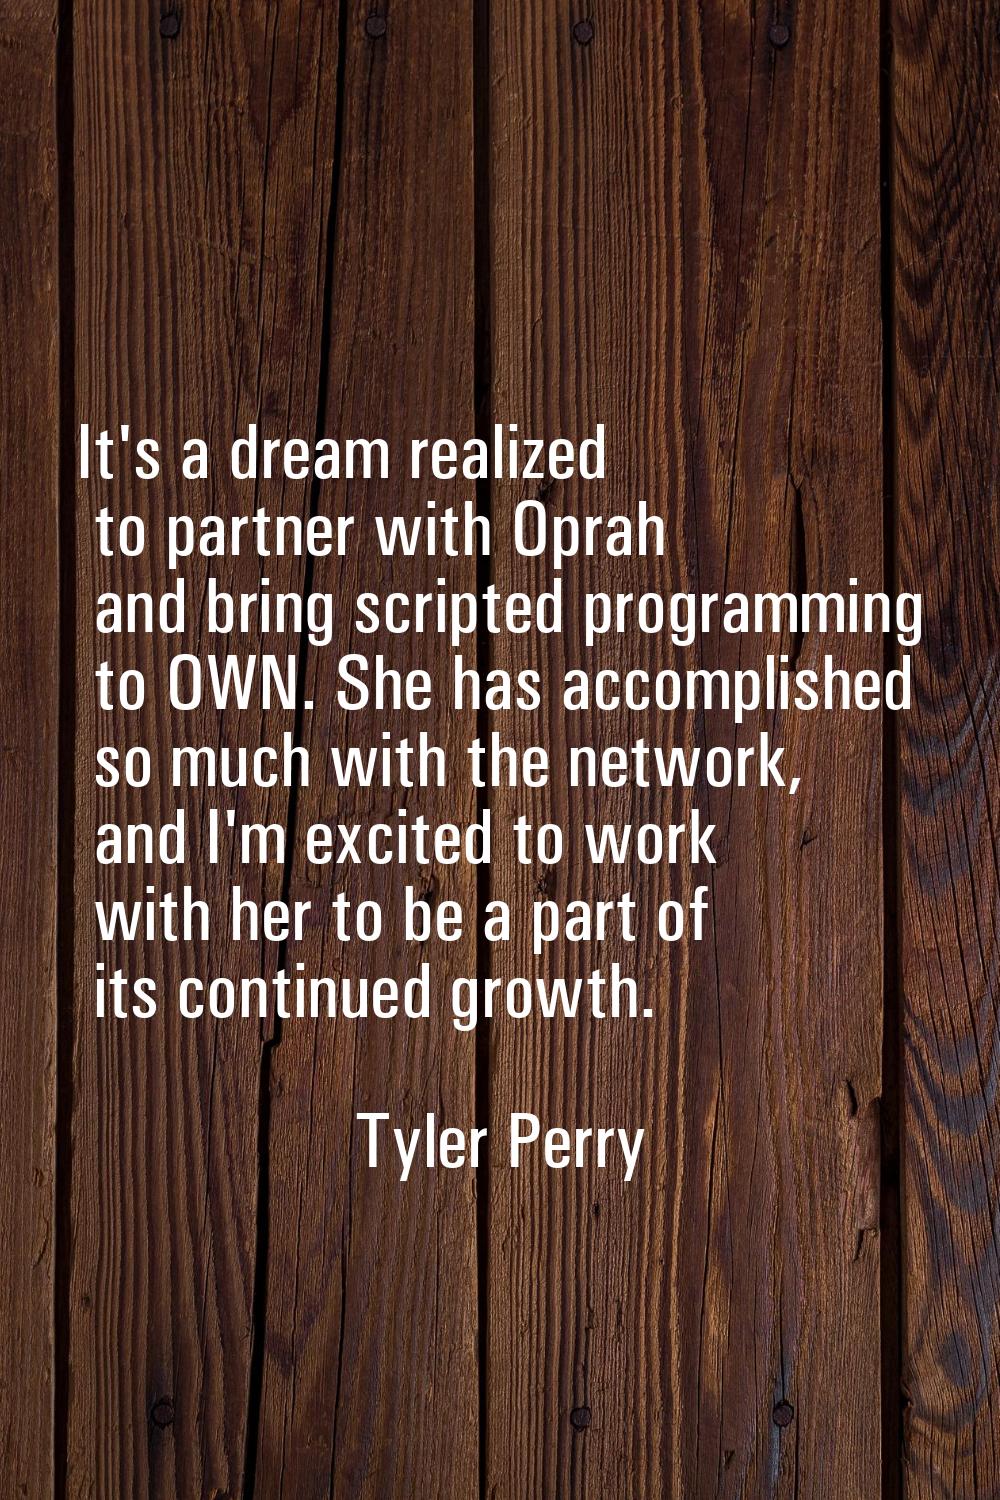 It's a dream realized to partner with Oprah and bring scripted programming to OWN. She has accompli